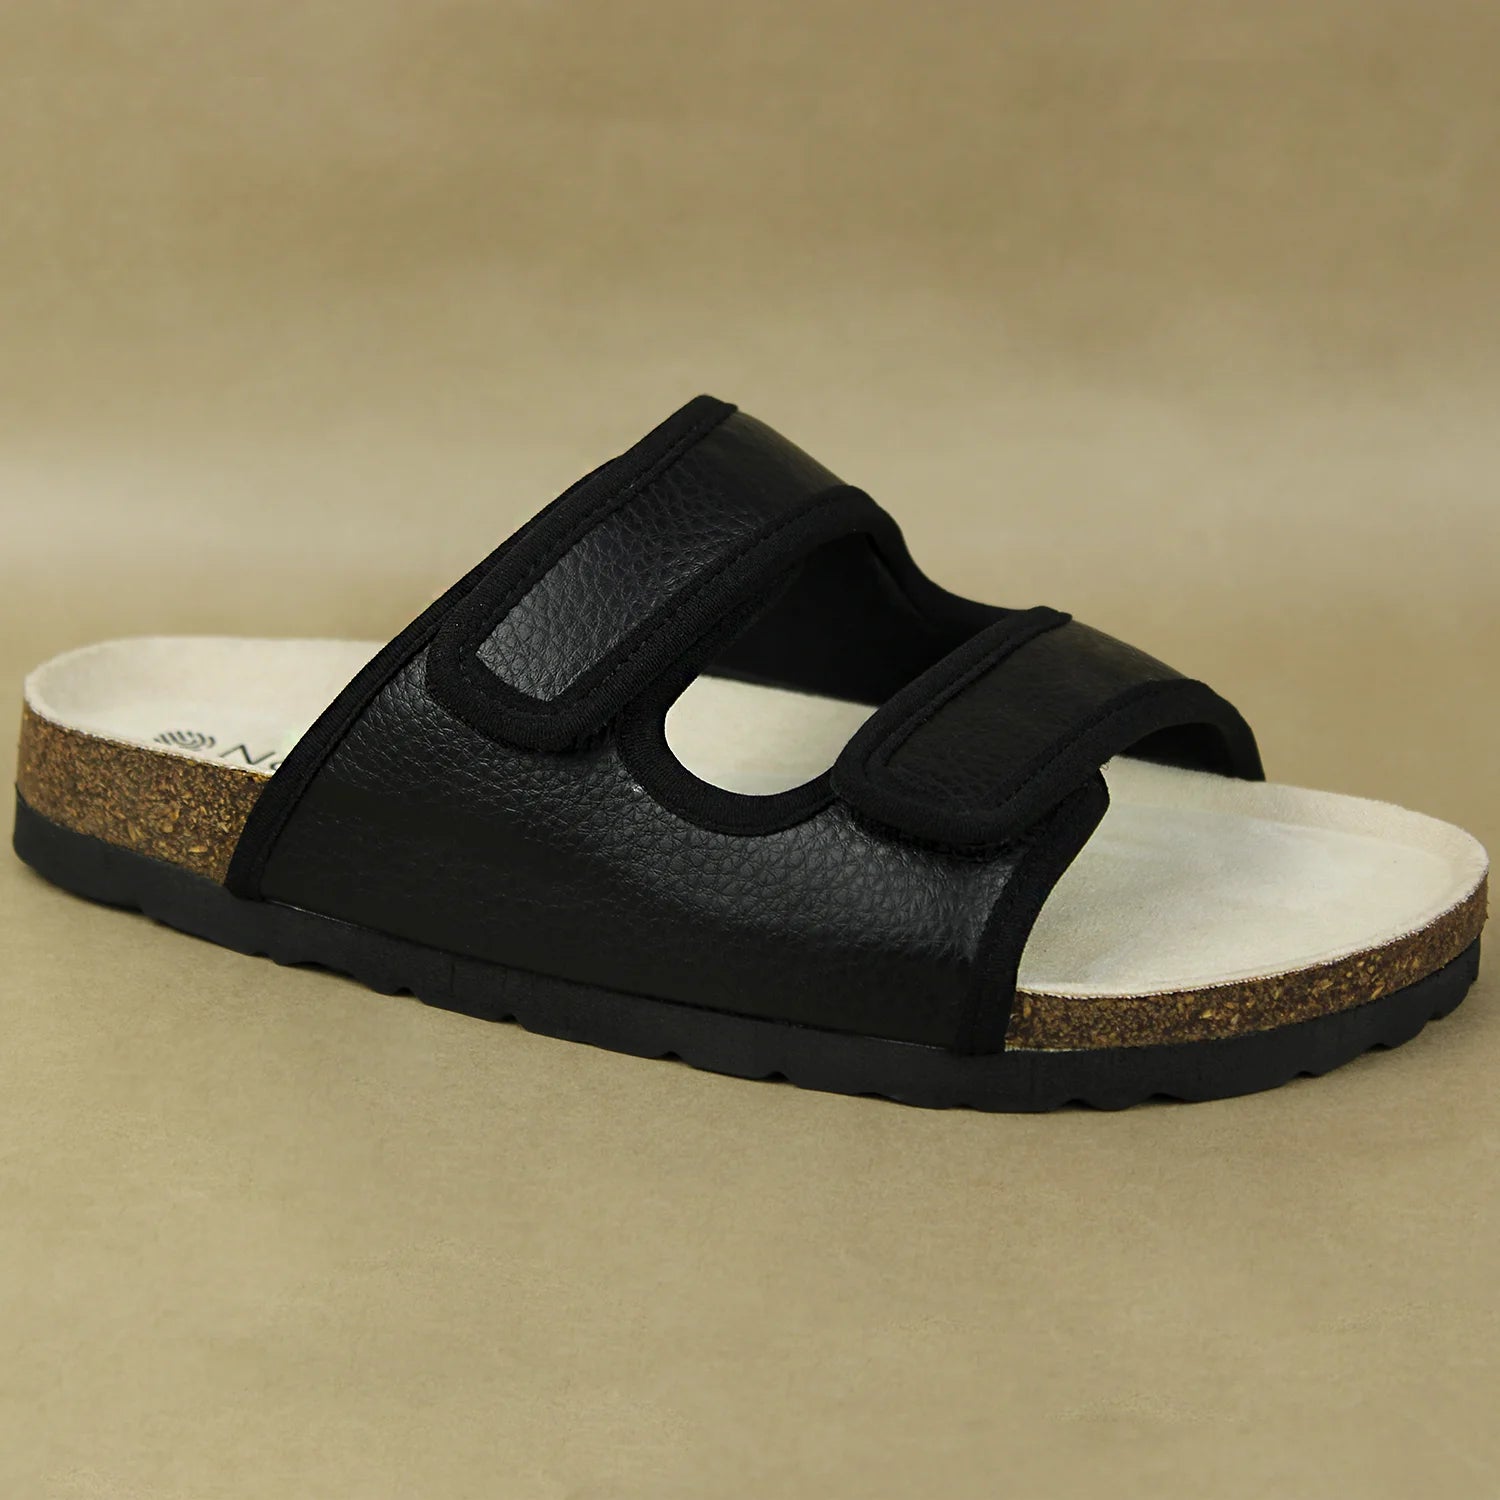 Buy Cork and Leather Sandals. Size 40. Yok Cork Online in India - Etsy